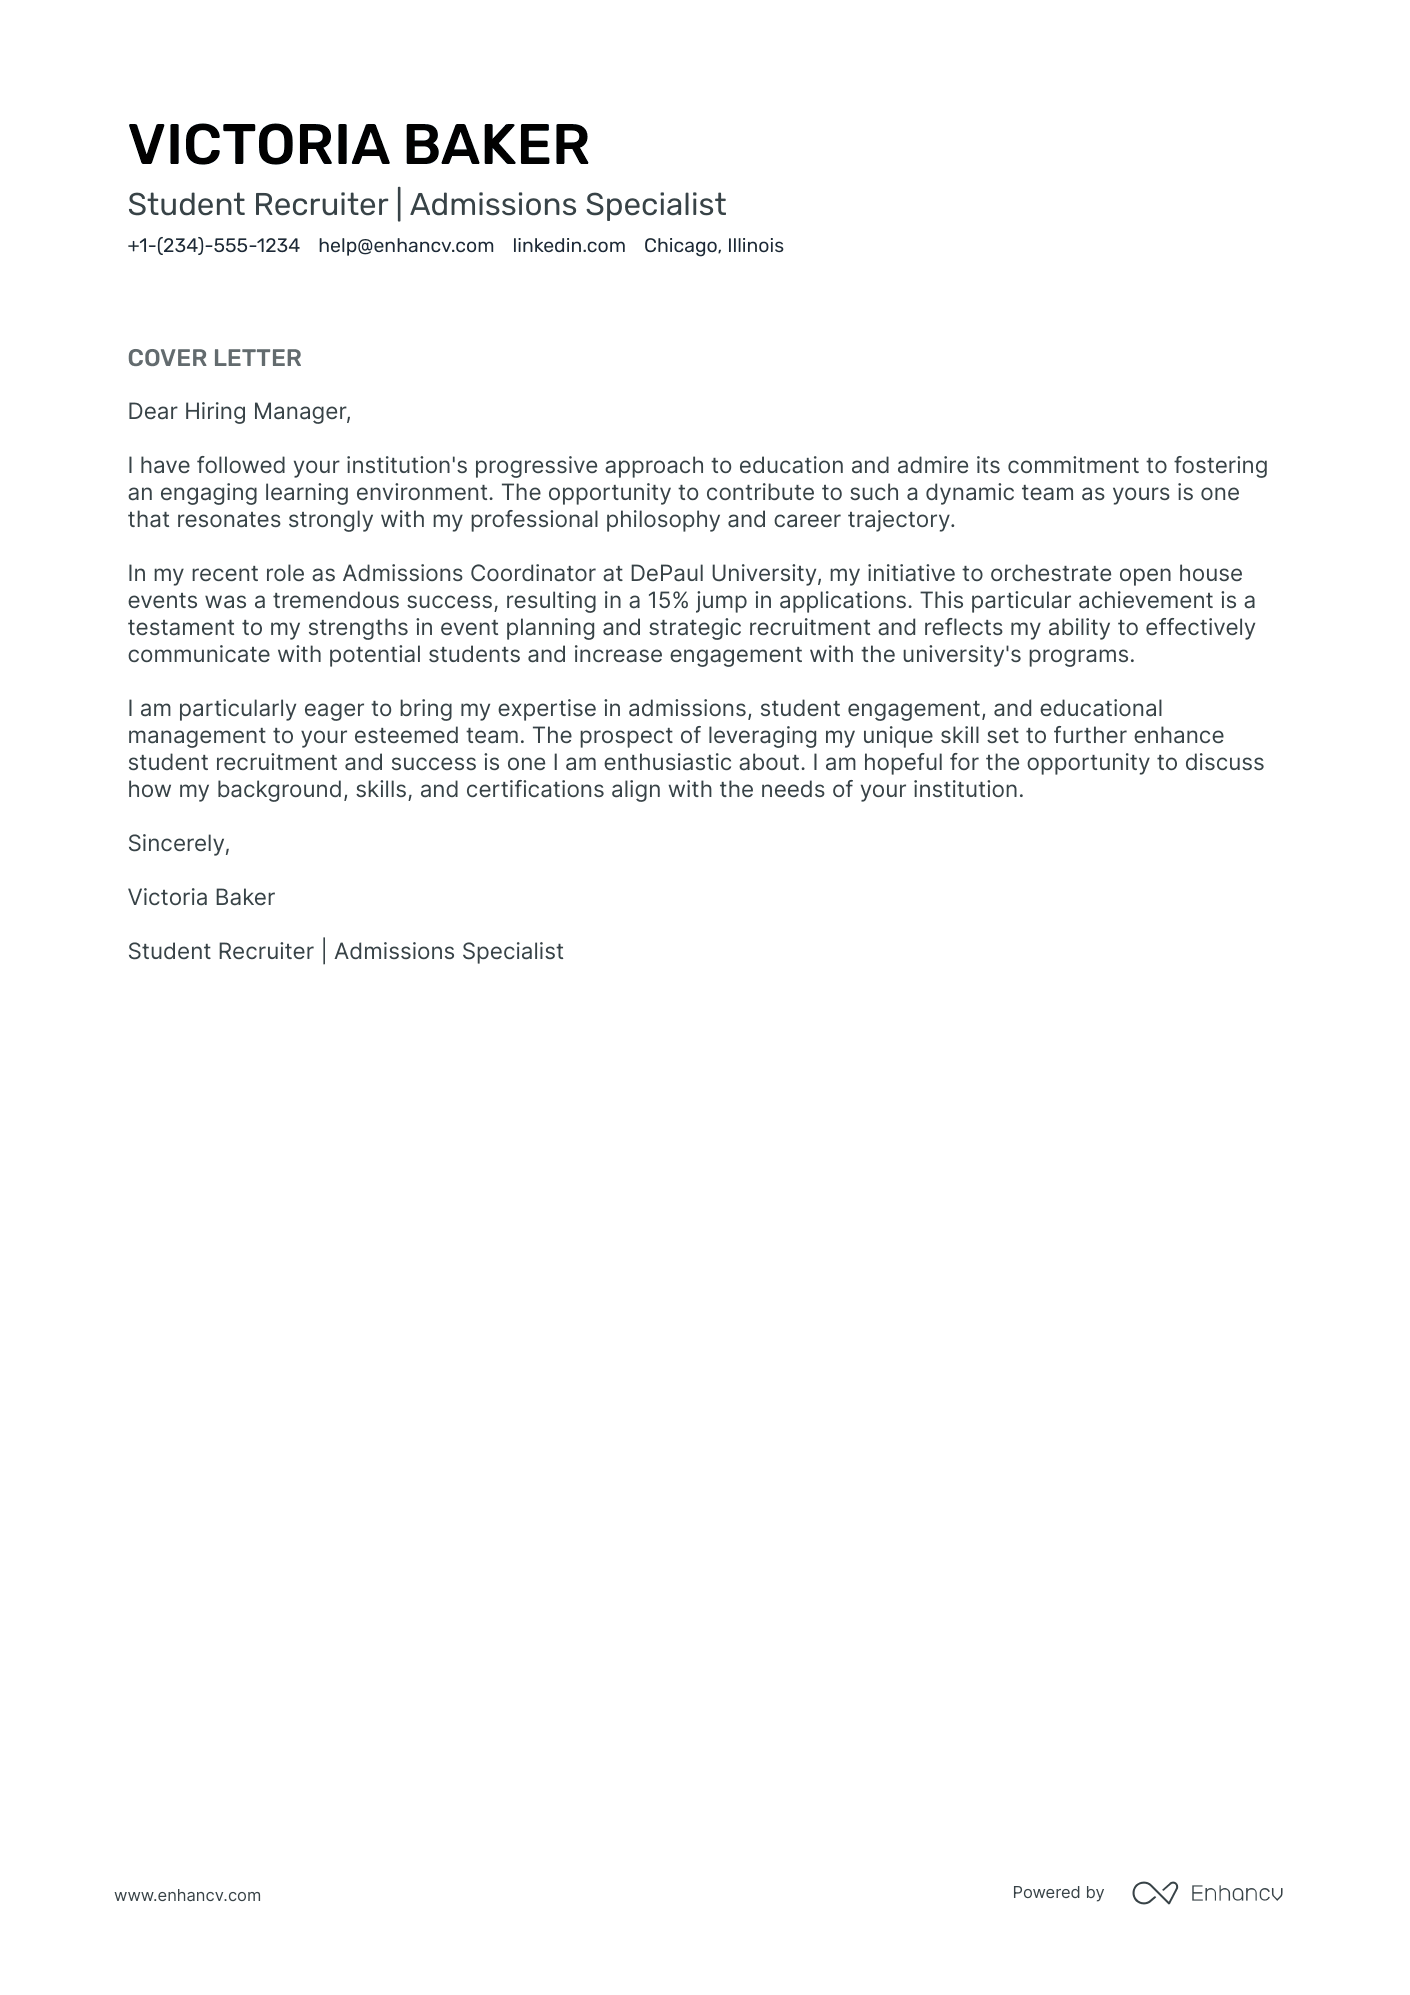 sample cover letter for recruitment role